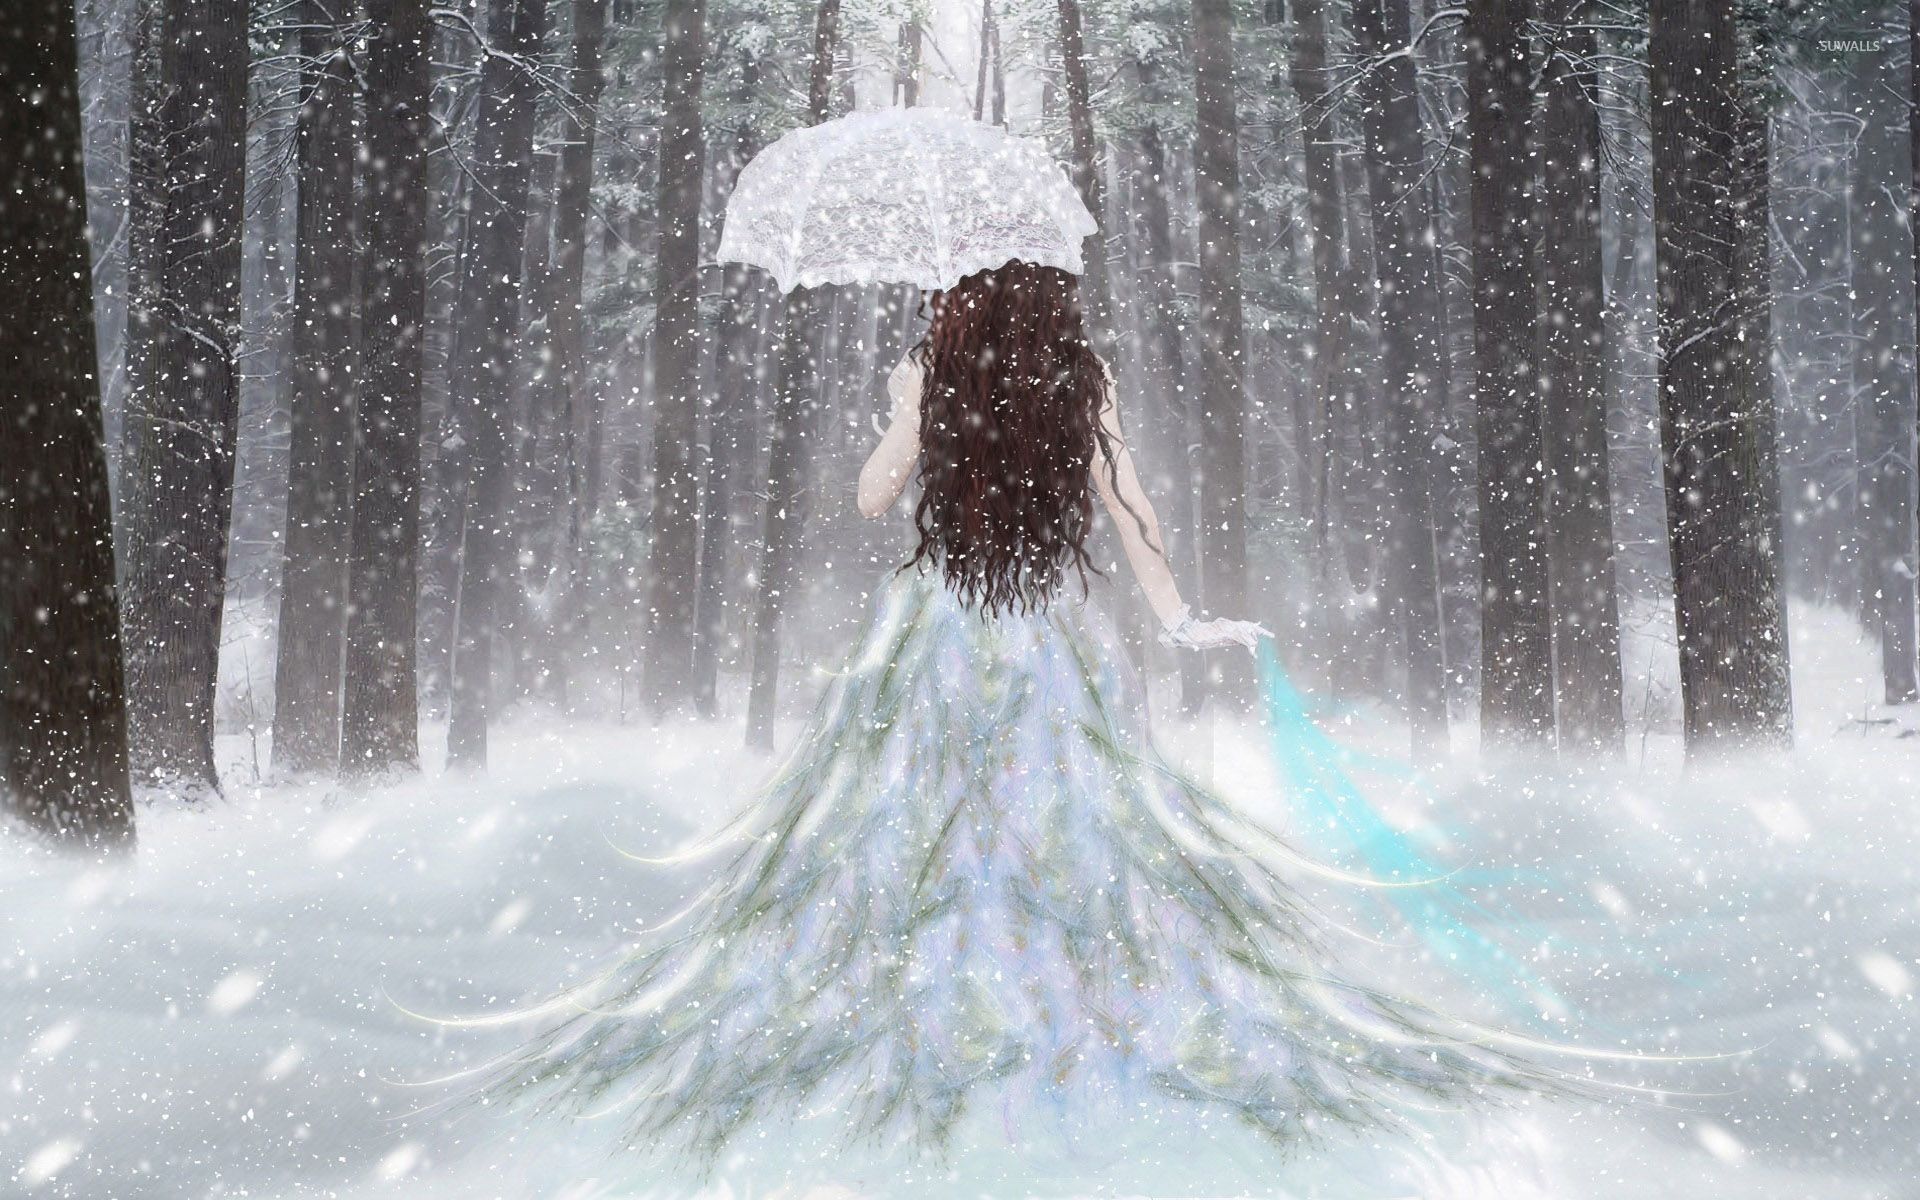 1920x1200 Princess with an umbrella in the snow wallpaper